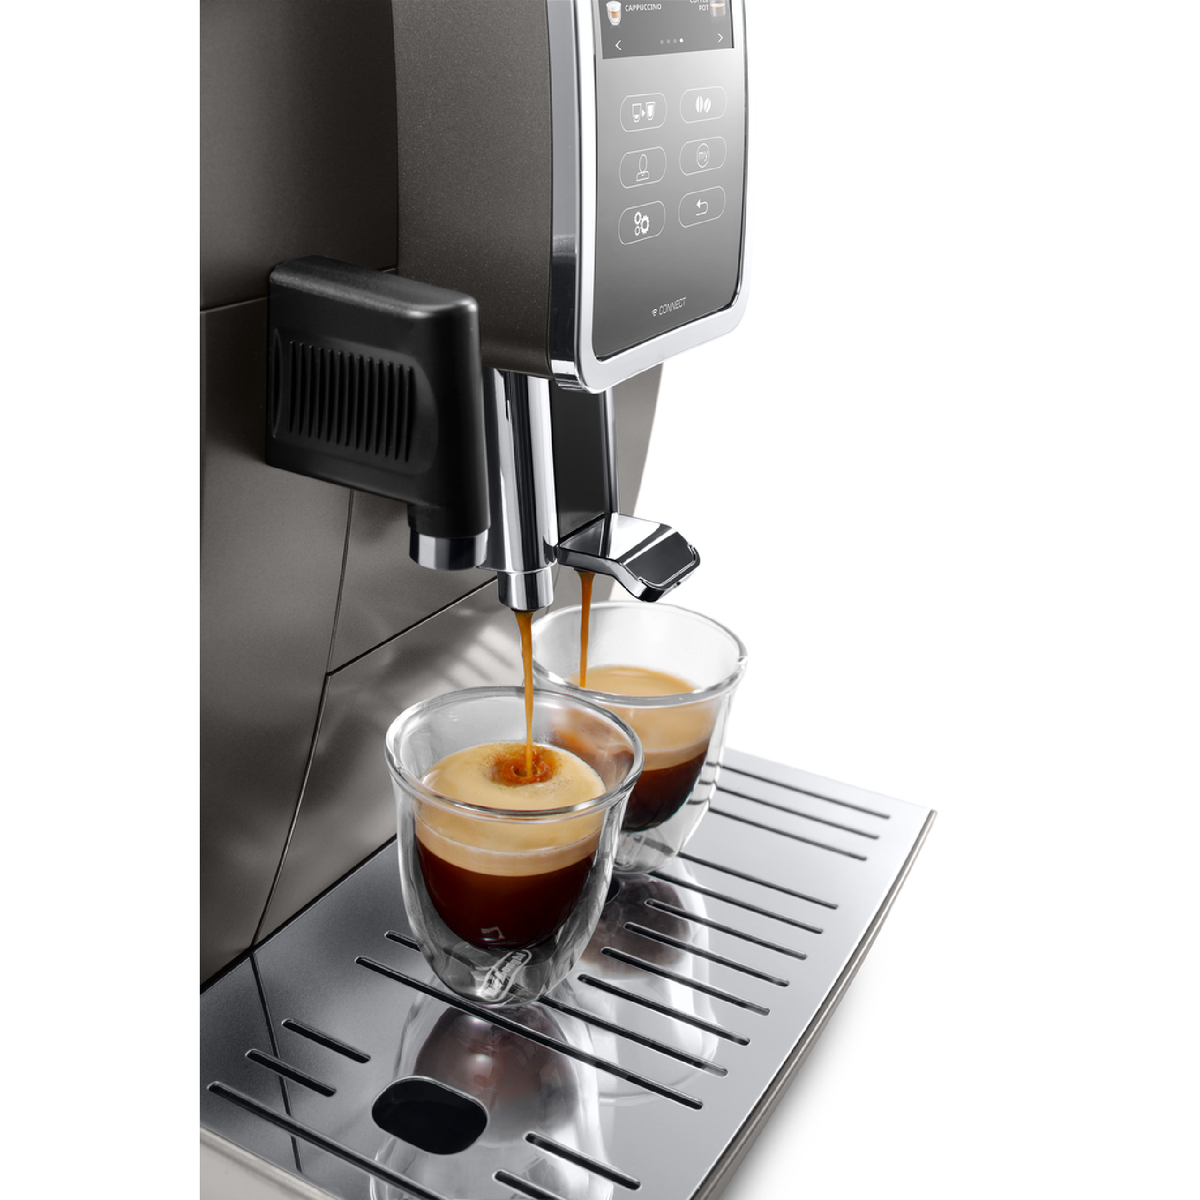  De'Longhi Dinamica Plus ECAM370.85.SB with 3,5” full touch TFT  color display, 4 soft touch buttons, size and aroma selection, milk carafe  My function, Pot function, coffee link app, silver: Home 